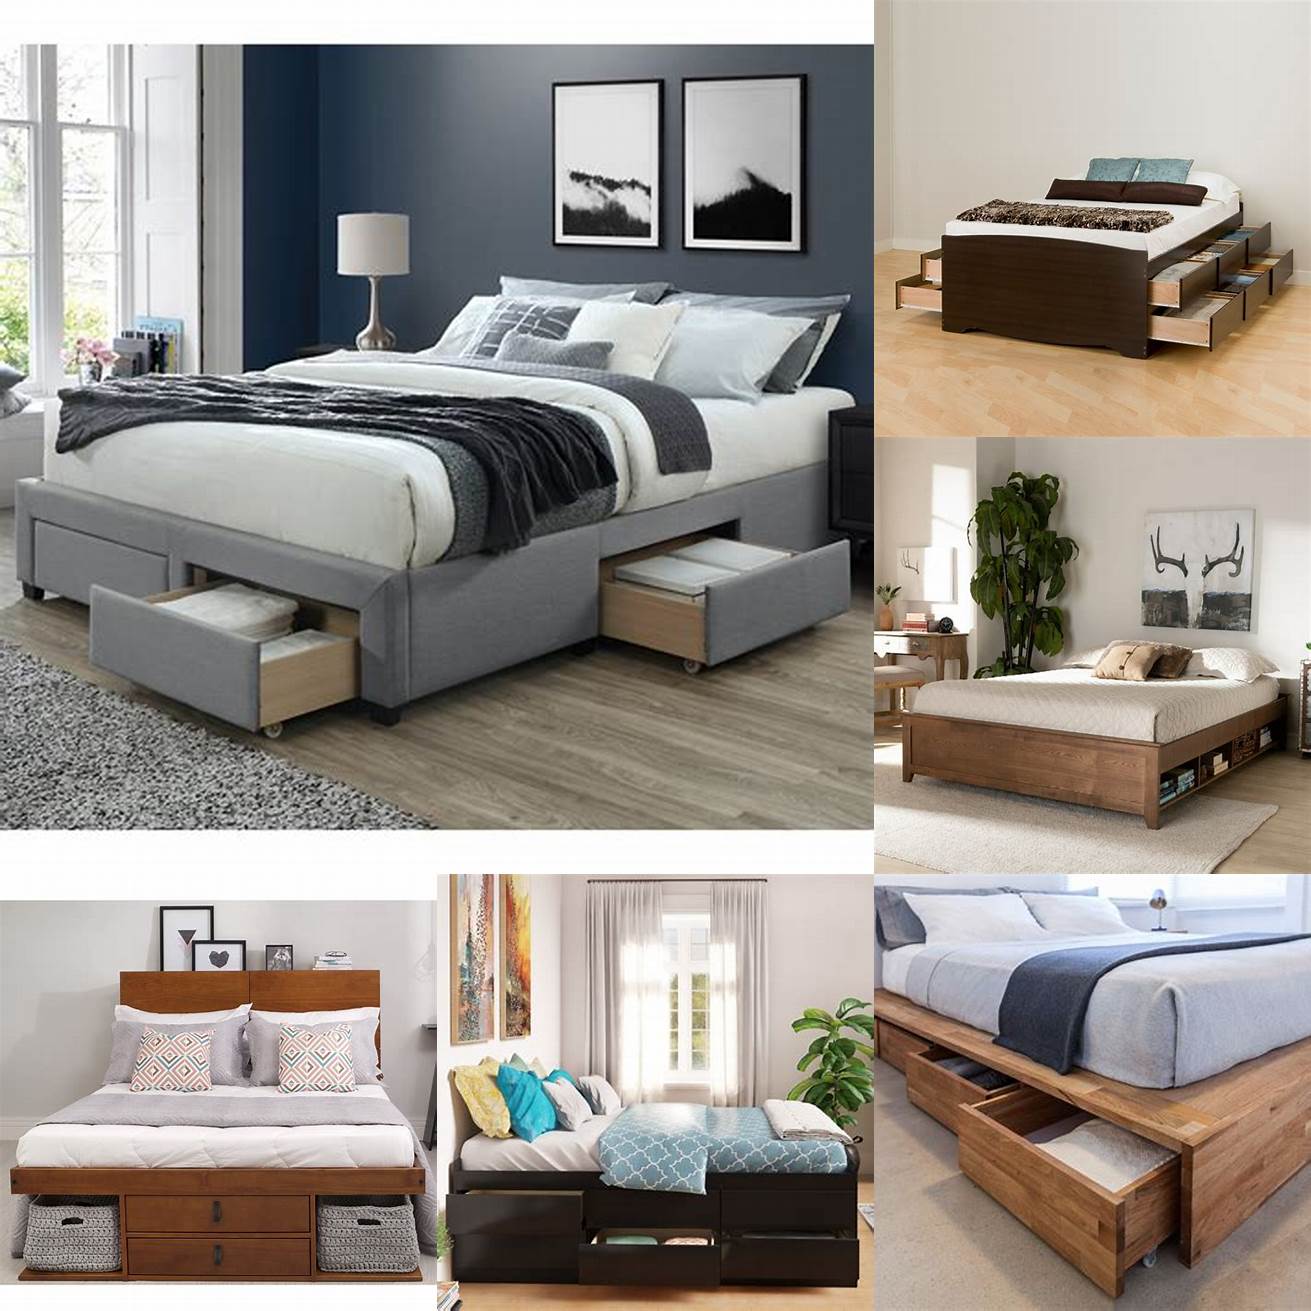 Platform bed with built-in storage drawers